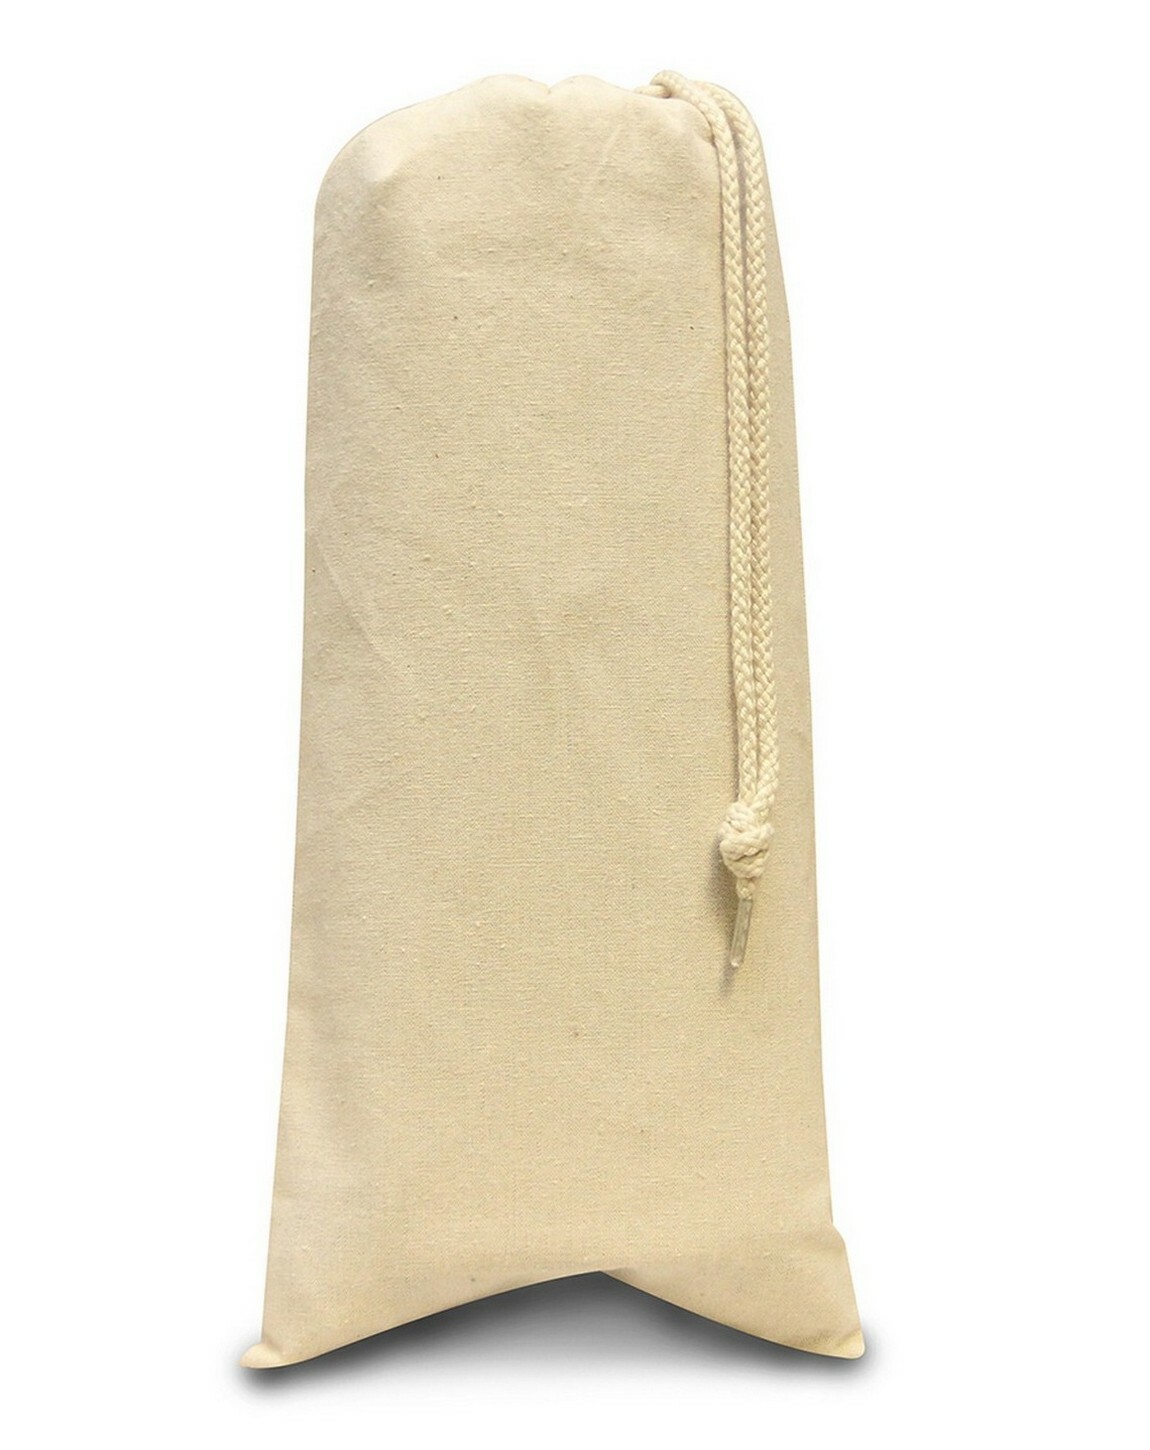 Port Authority B085 Laundry Bag - Natural